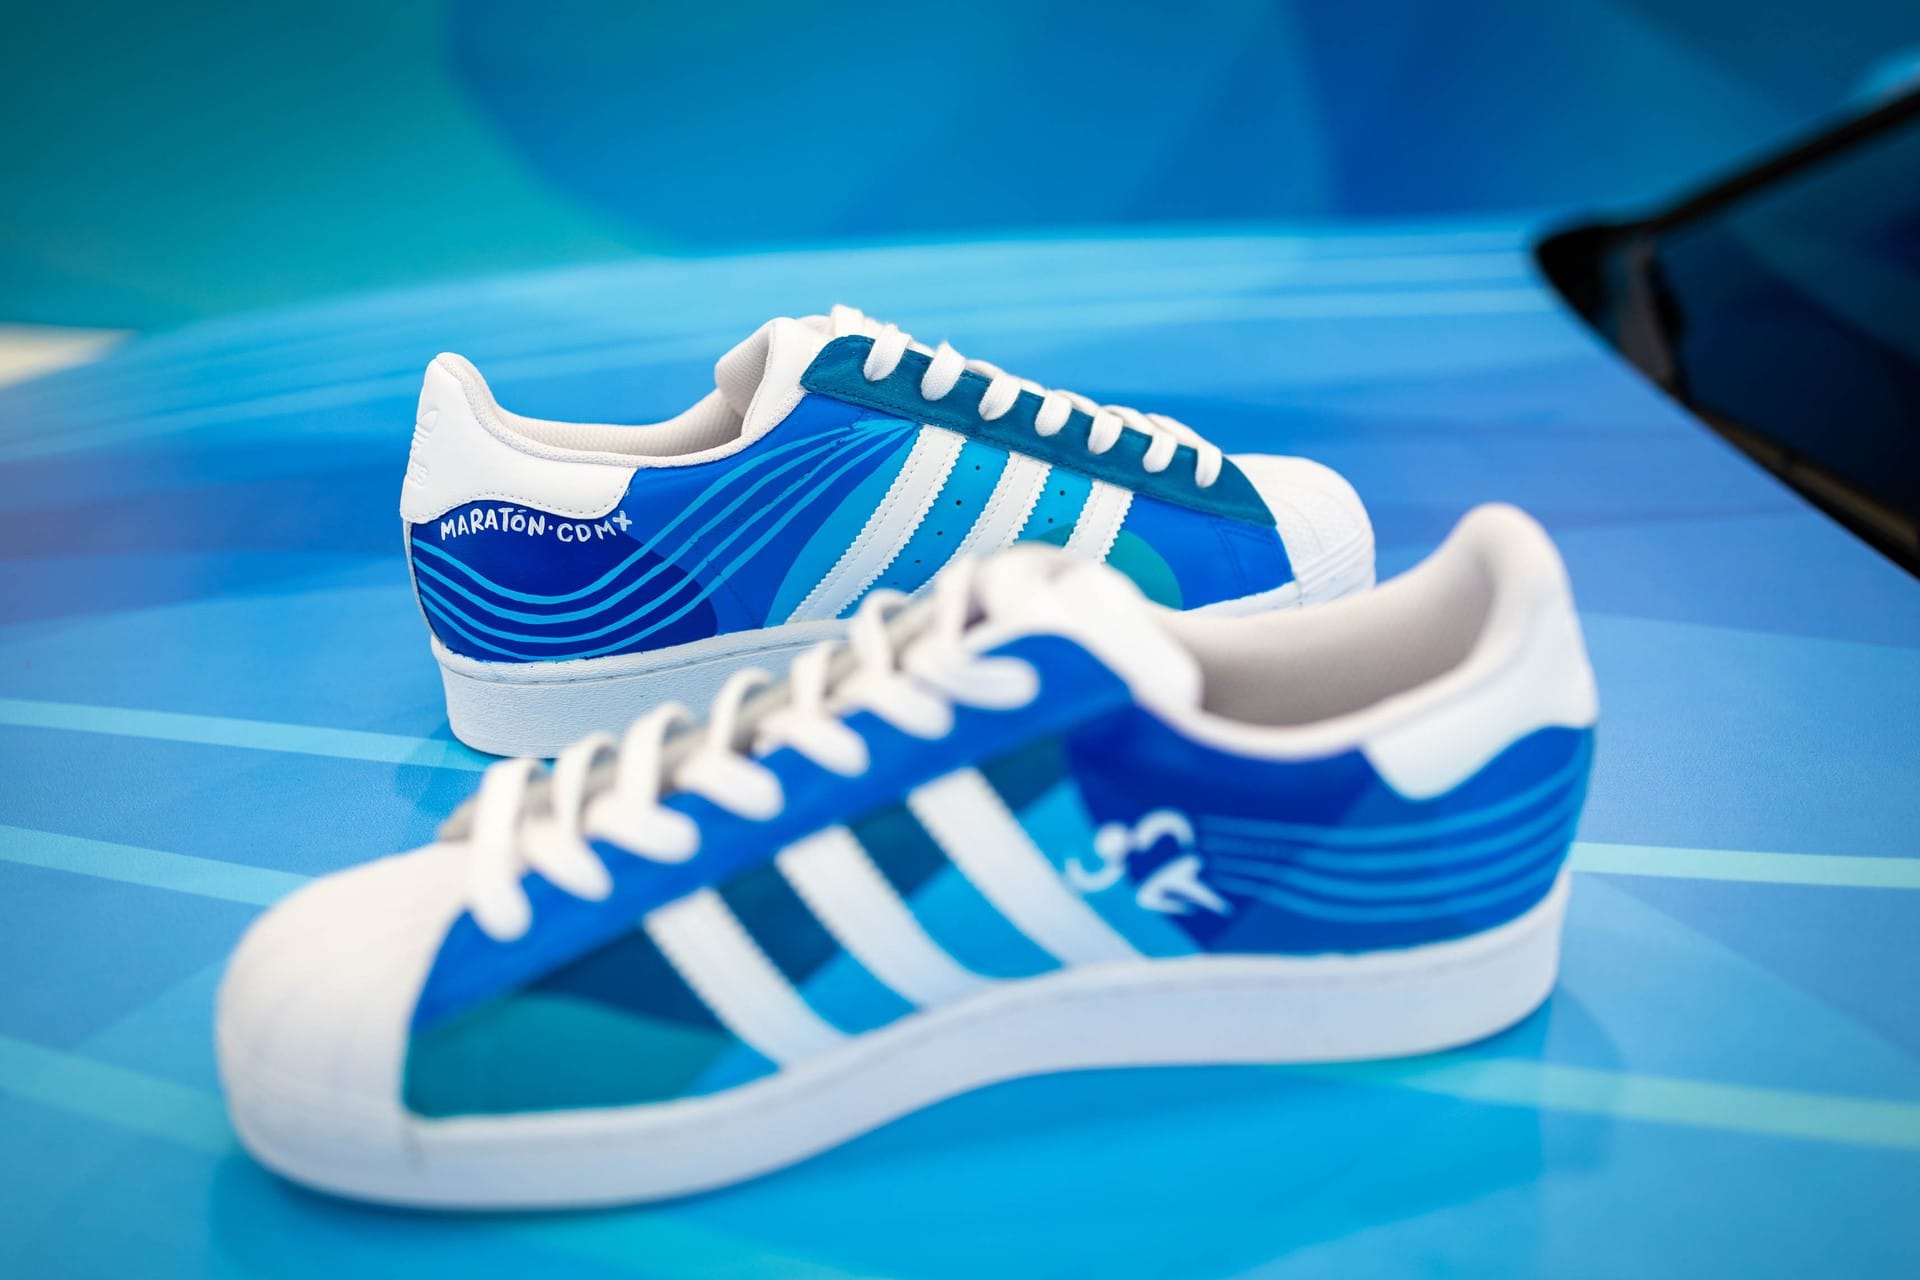 Continuo Cordero Inevitable BMW x Adidas releases limited edition Superstar tennis sneakers